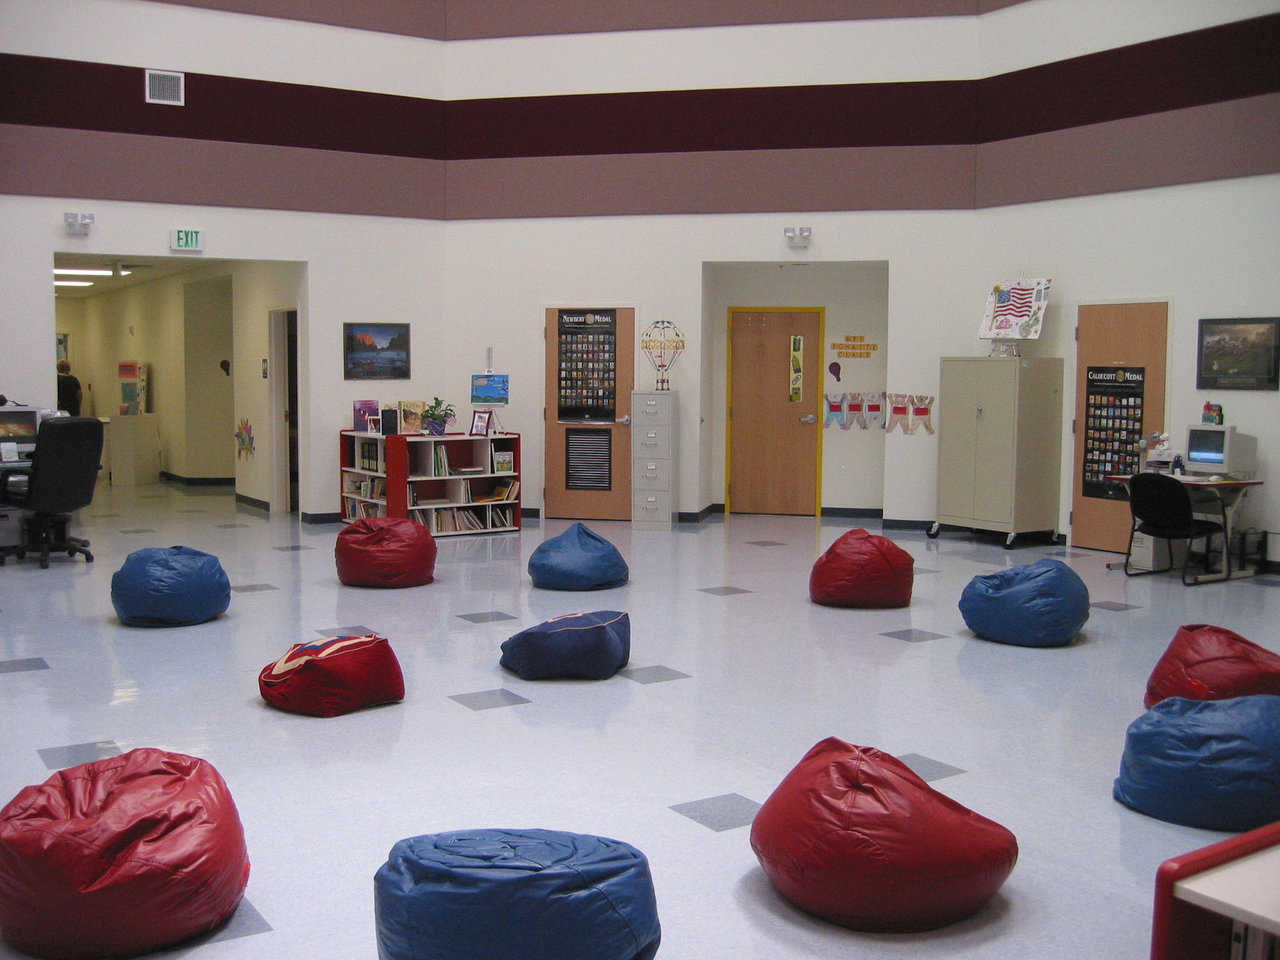 Beanbag anyone? — Colorful beanbags provide student seating in the commons area of the “Dreams are Free” facility.